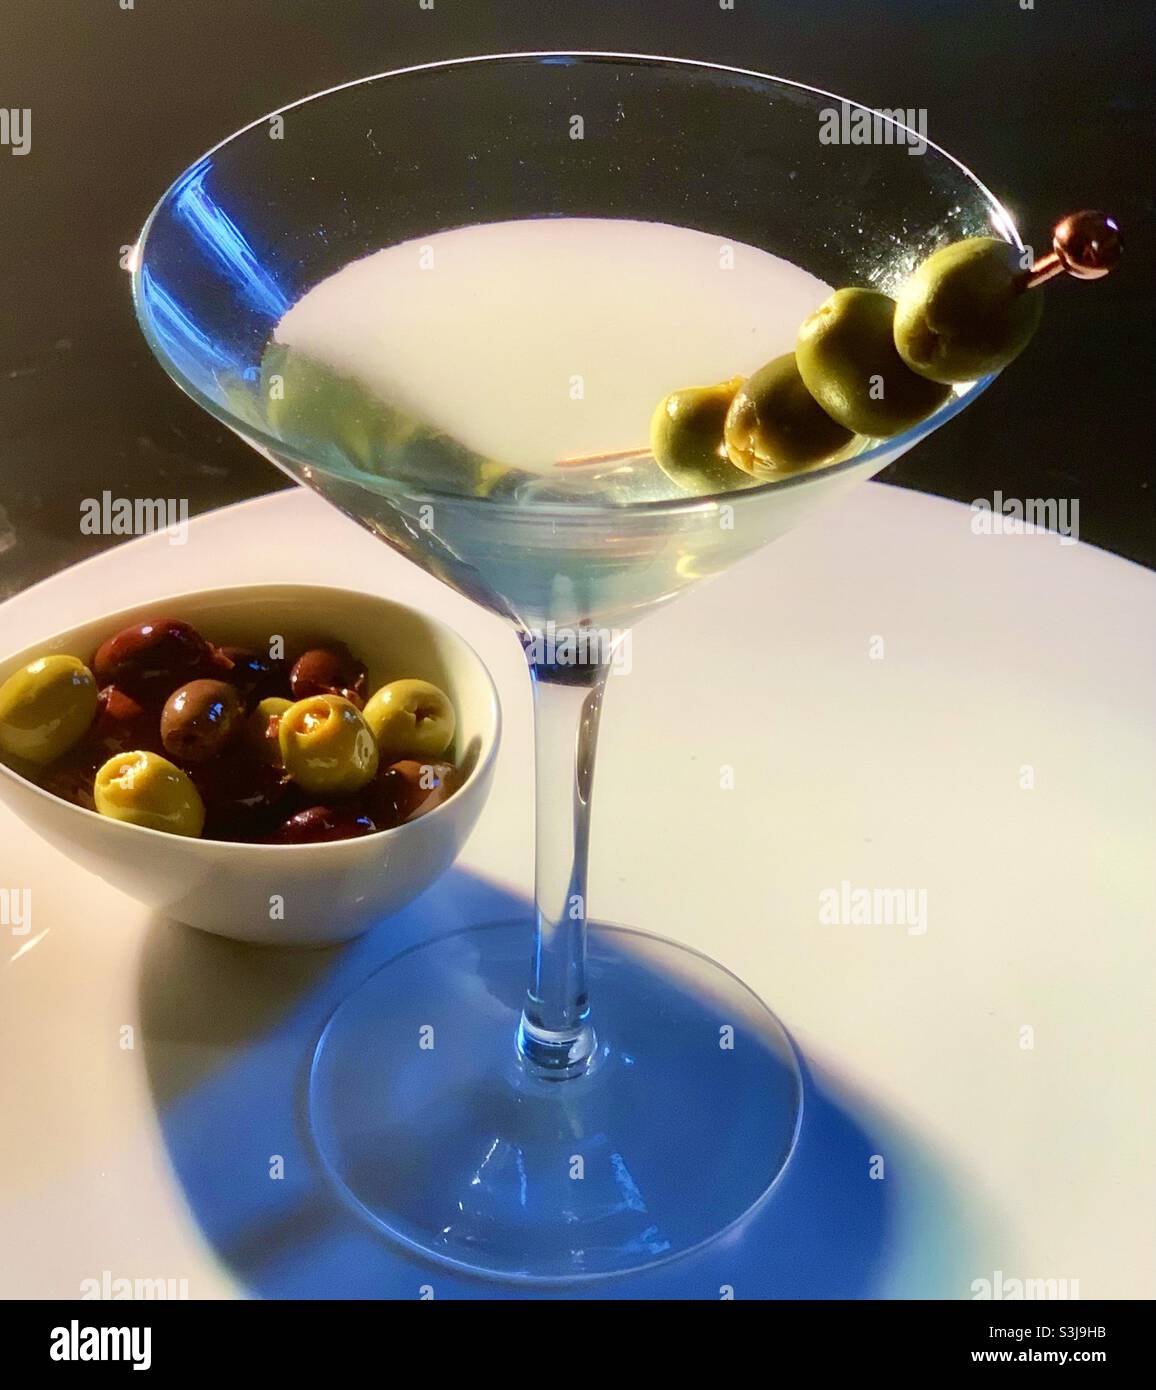 Martini with olives Stock Photo